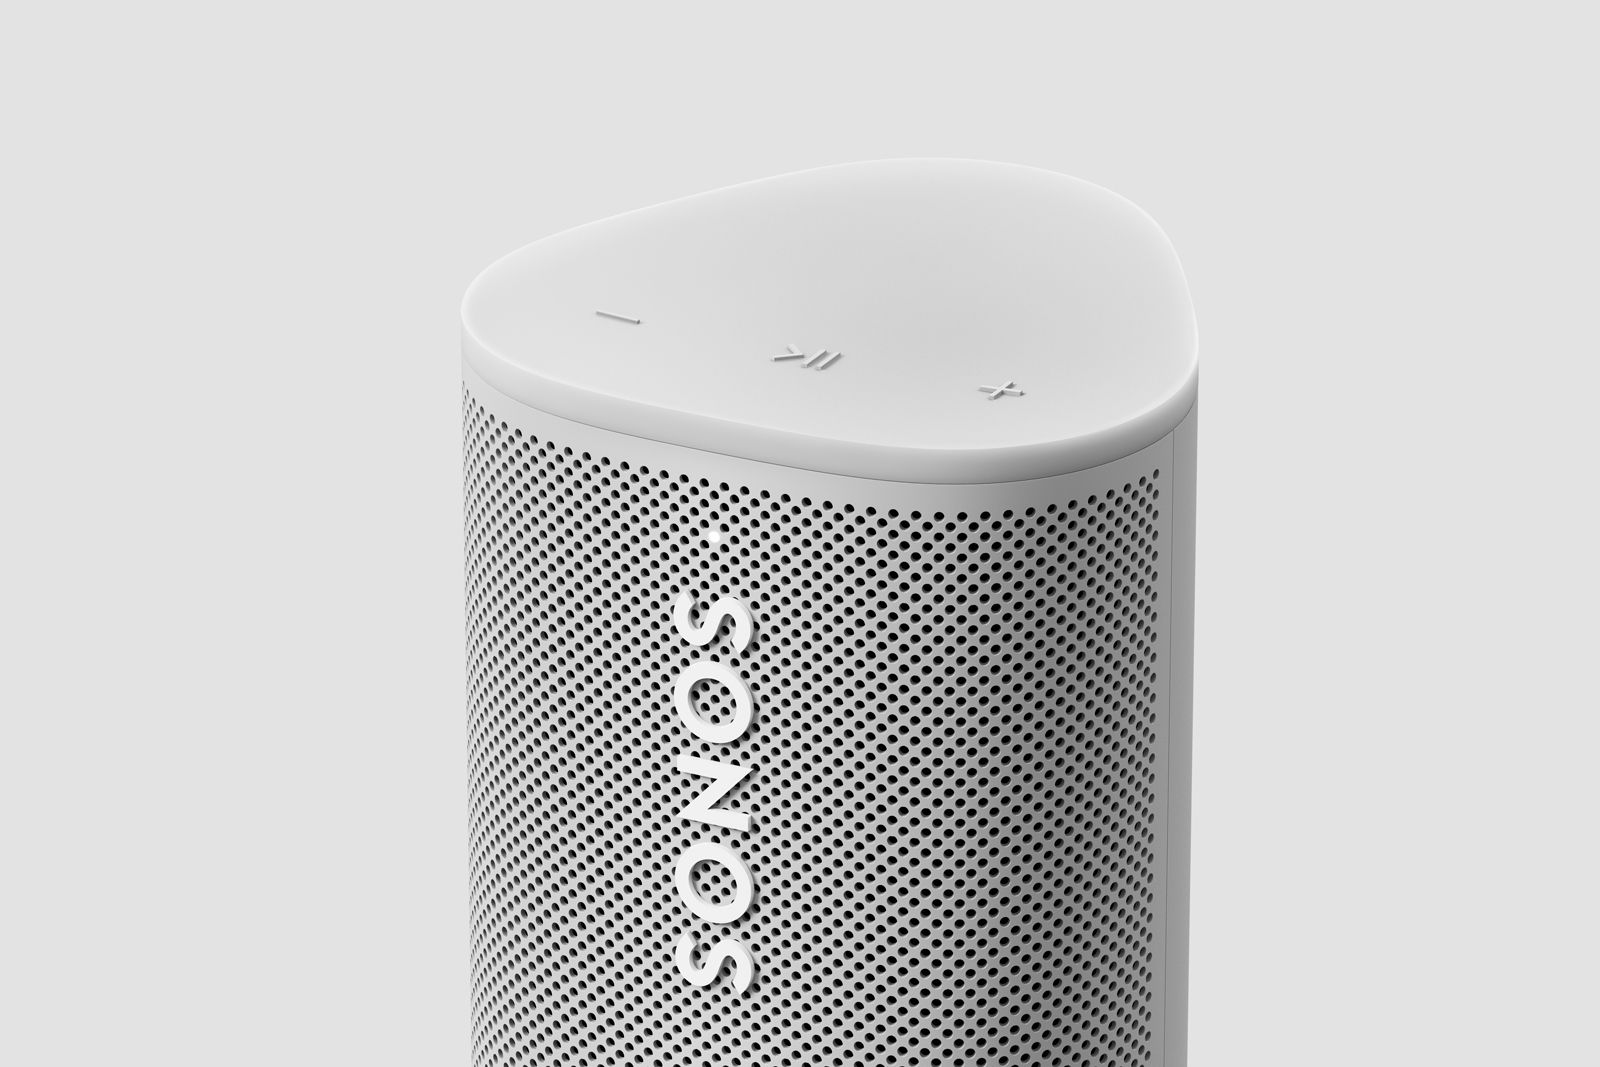 Sonos reportedly working on multi-directional speaker with Dolby Atmos photo 1